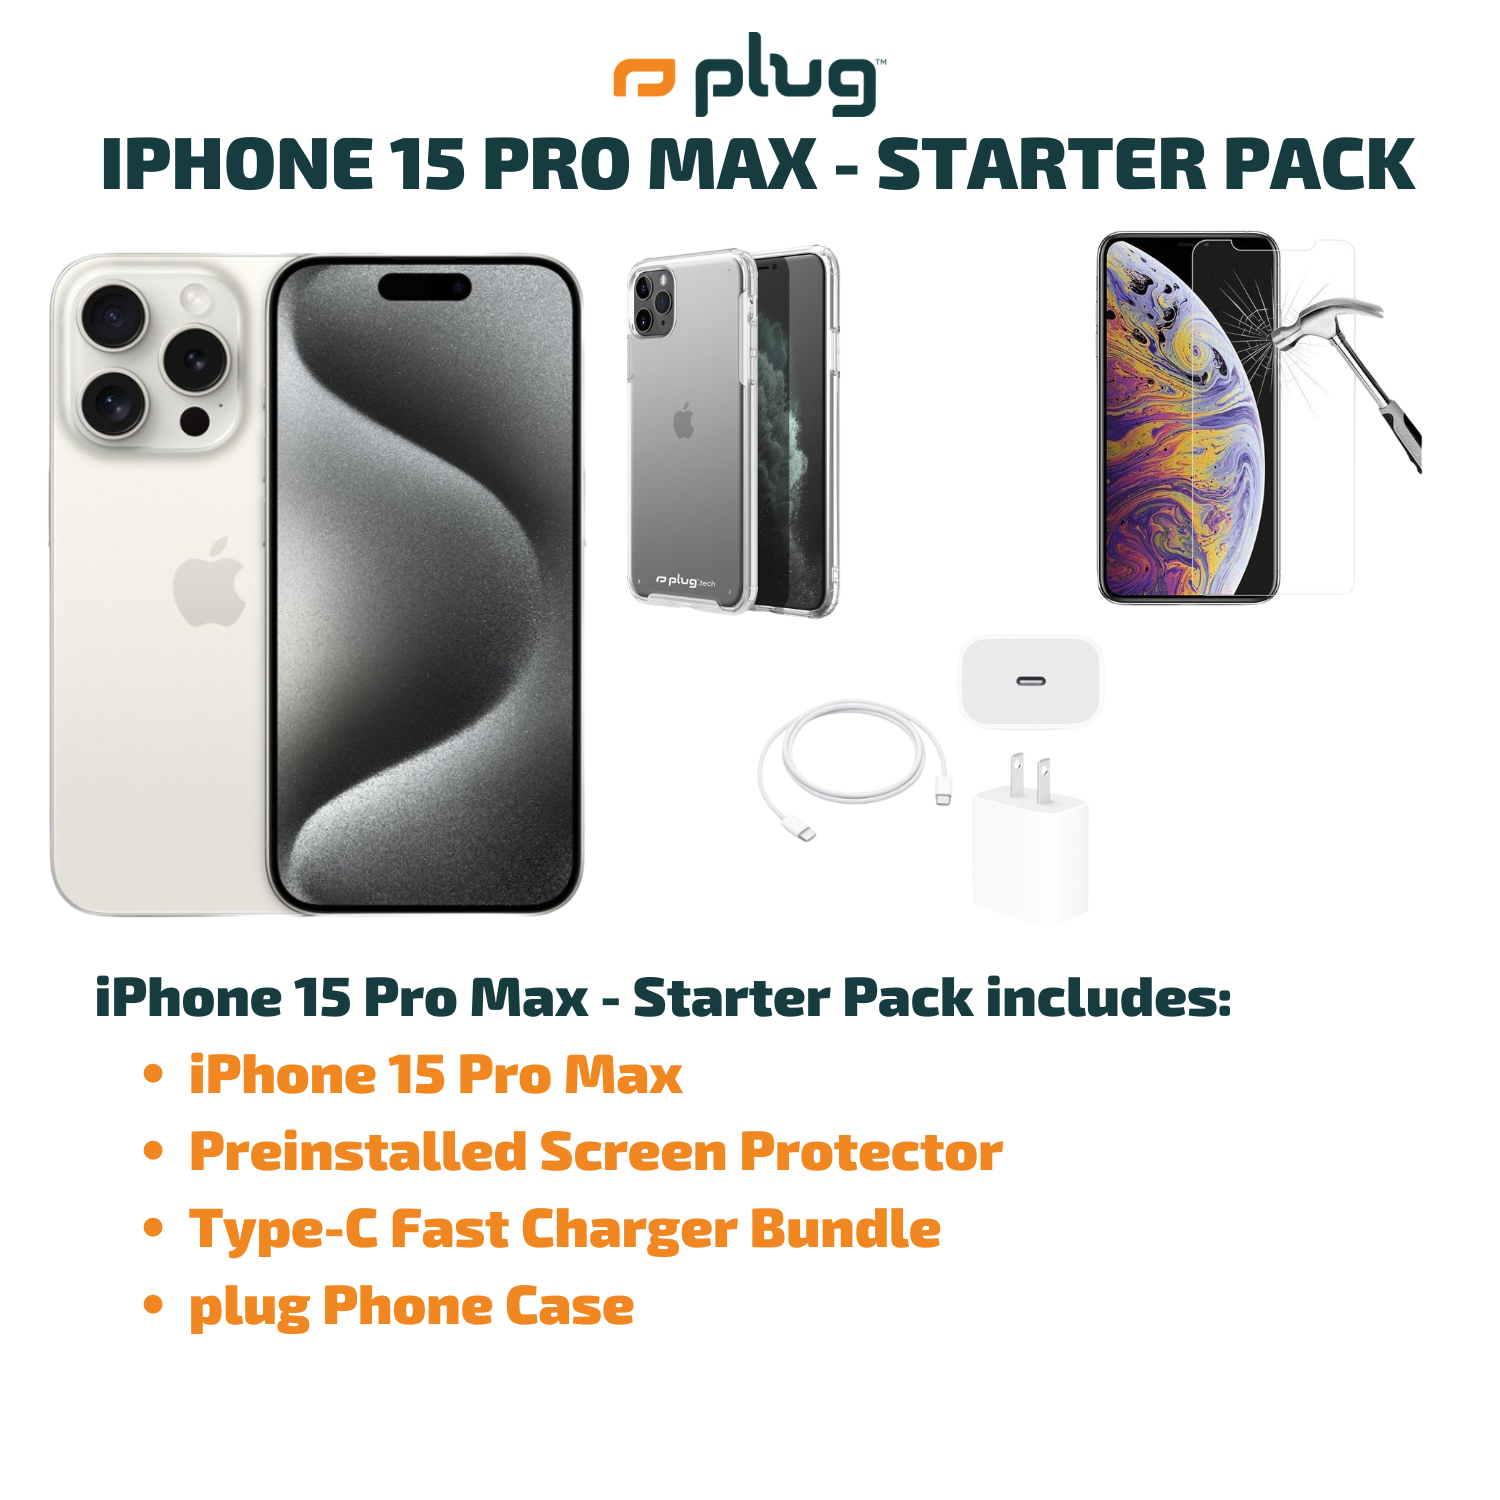 iPhone 15 Pro Max - Starter Pack